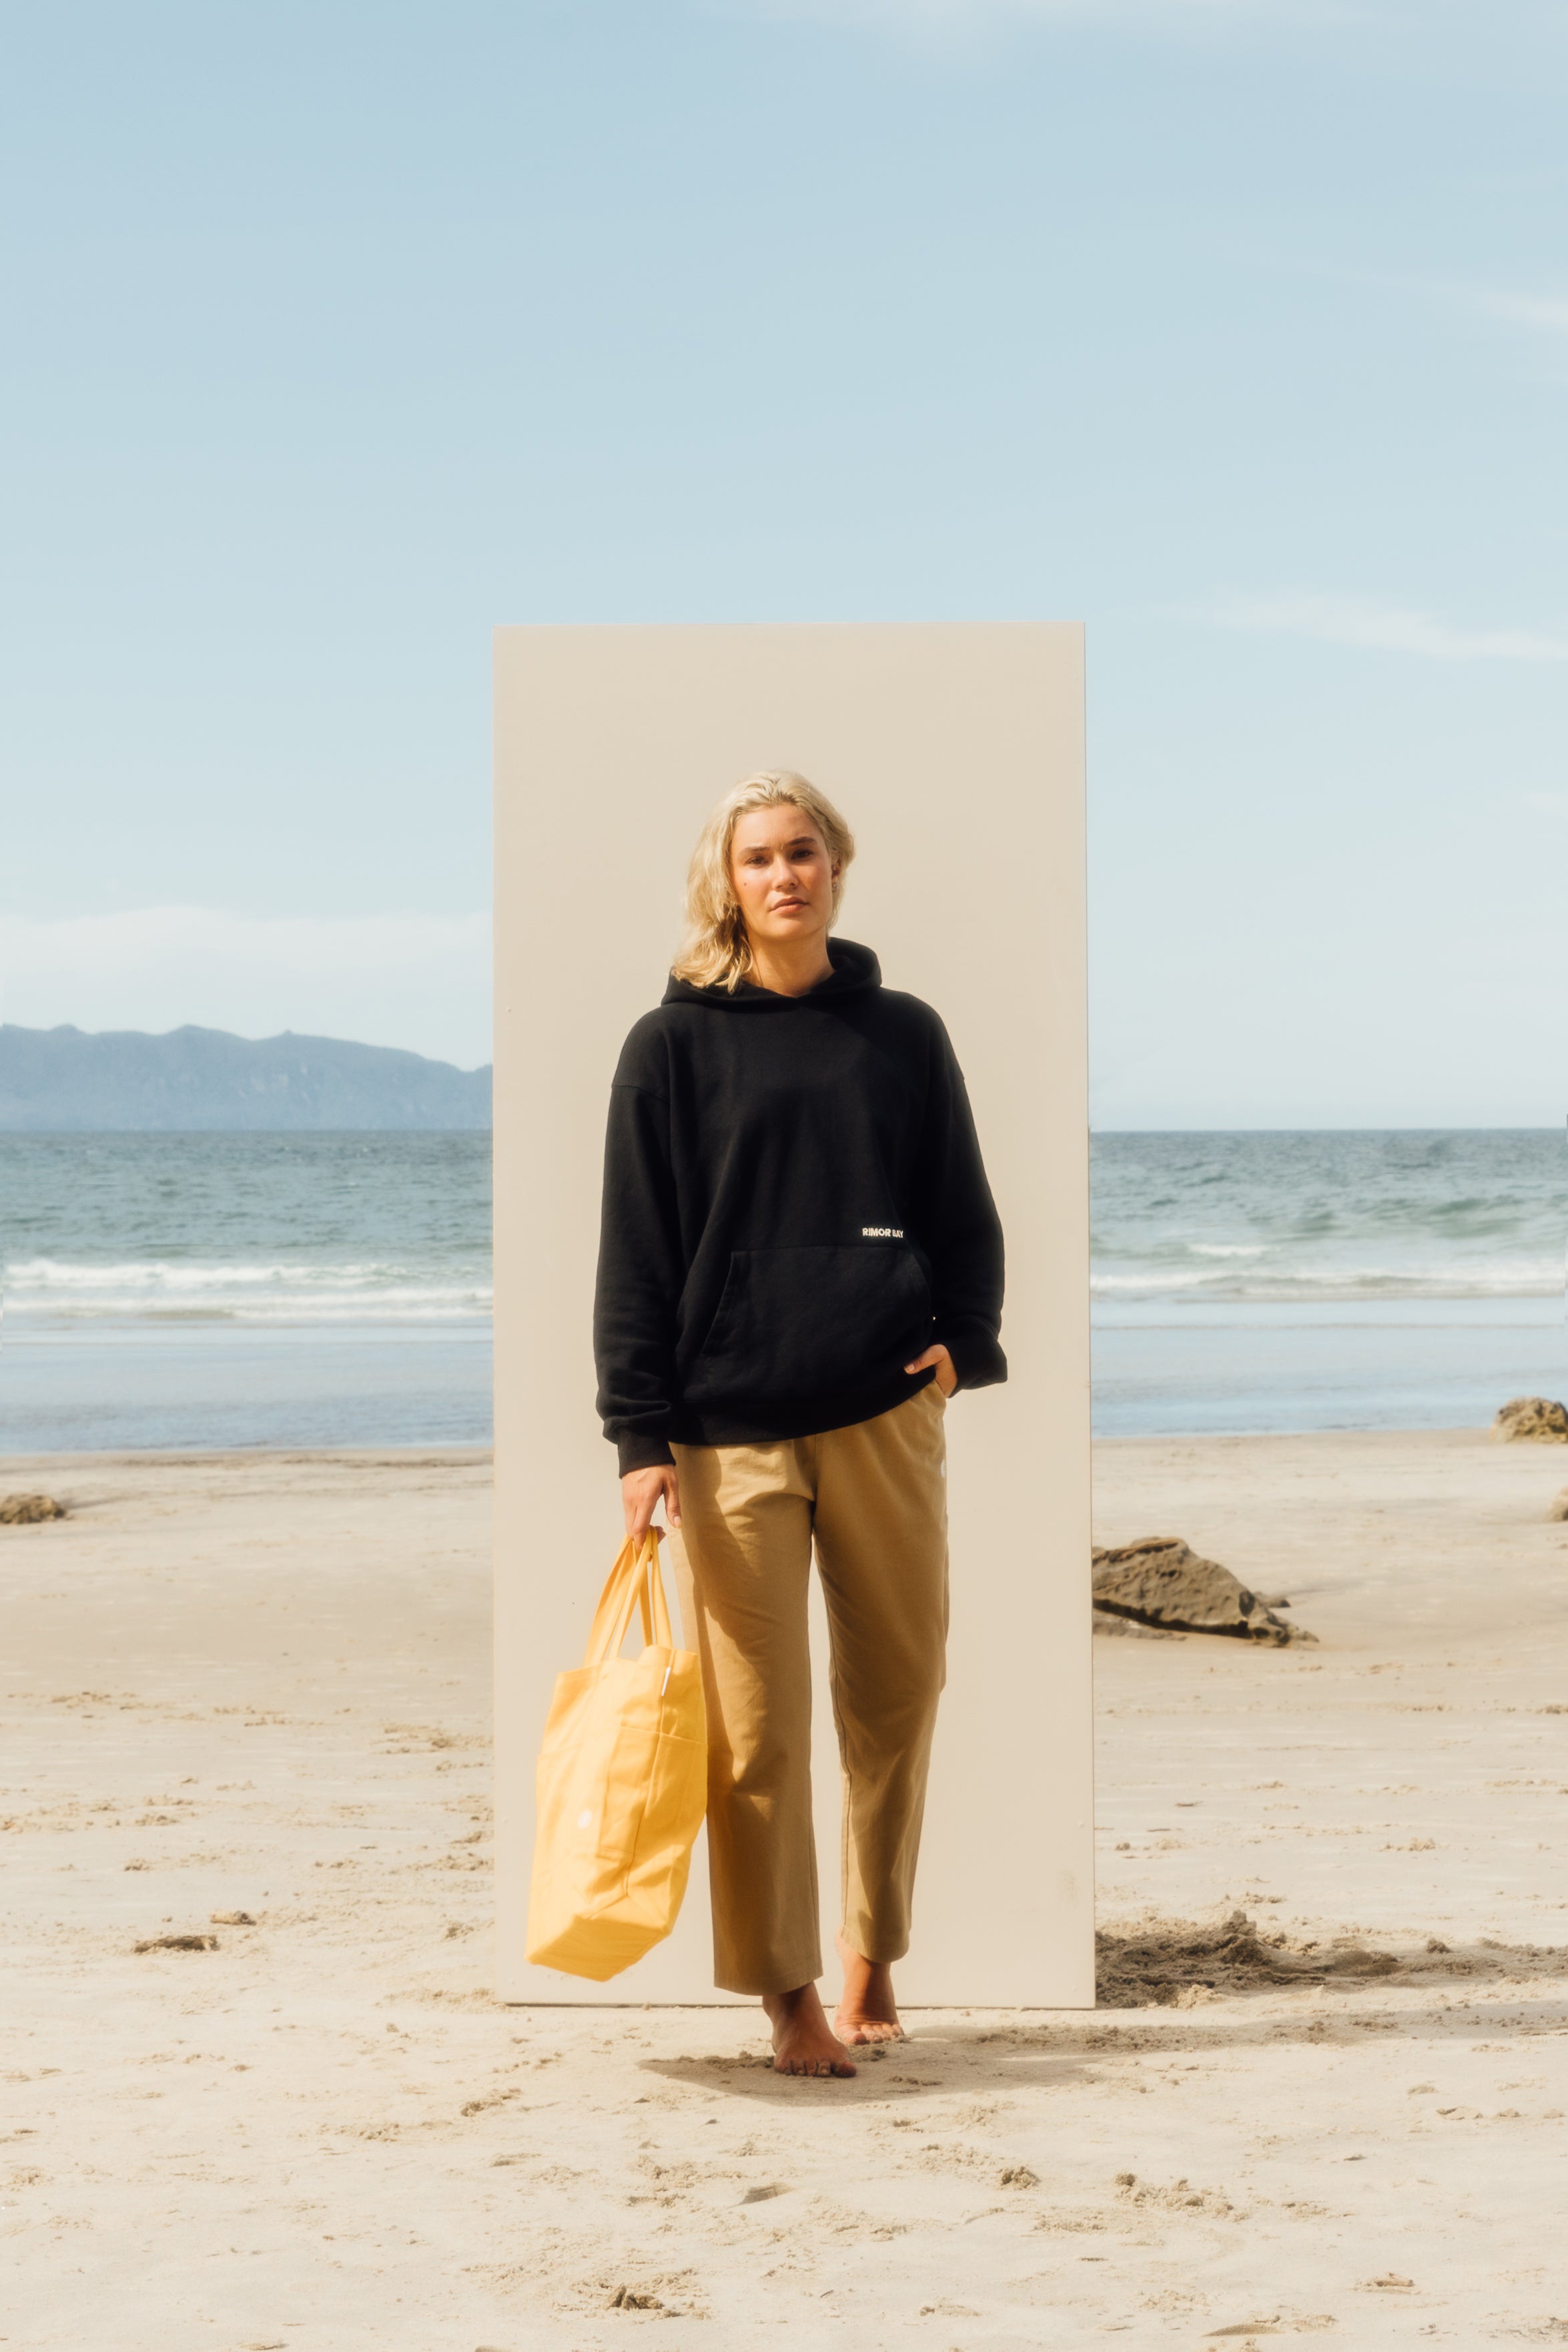 girl standing on beach in front of a beige board wearing black hoodie, beige pants, holding a yellow beach bag